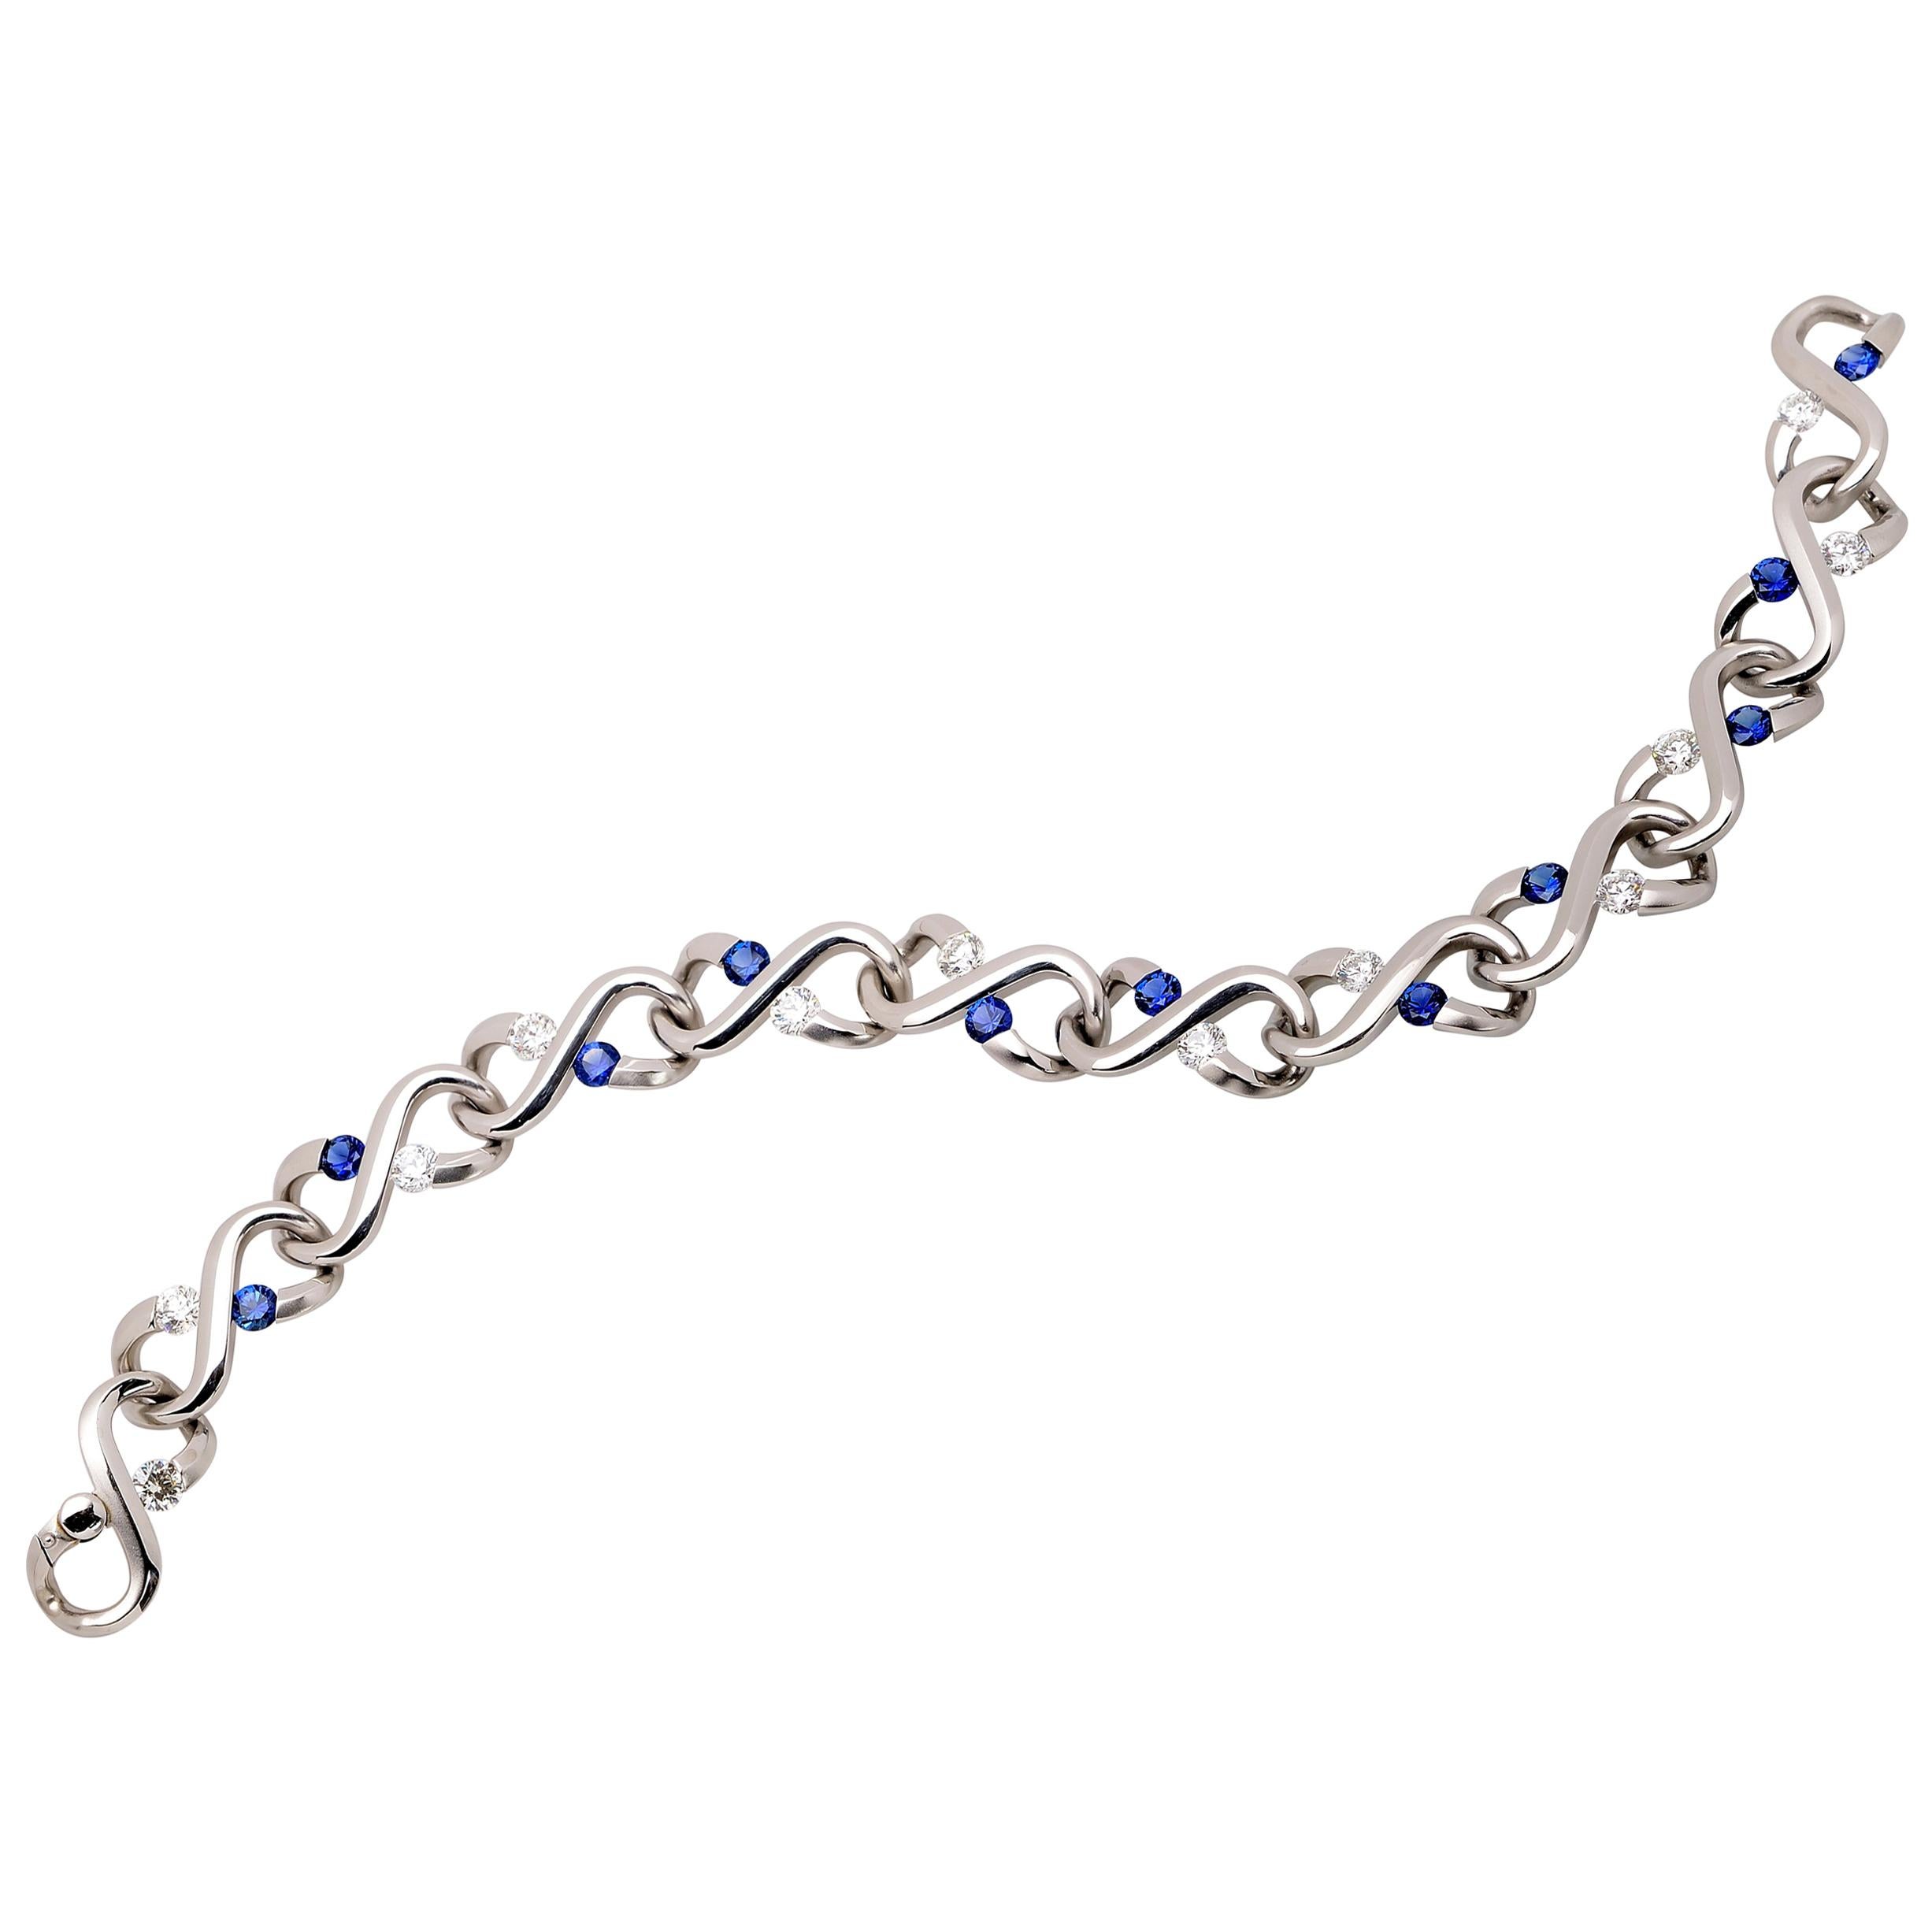 Steven Kretchmer Small Infinity Bracelet with Tension-Set Diamonds and Sapphires im Angebot